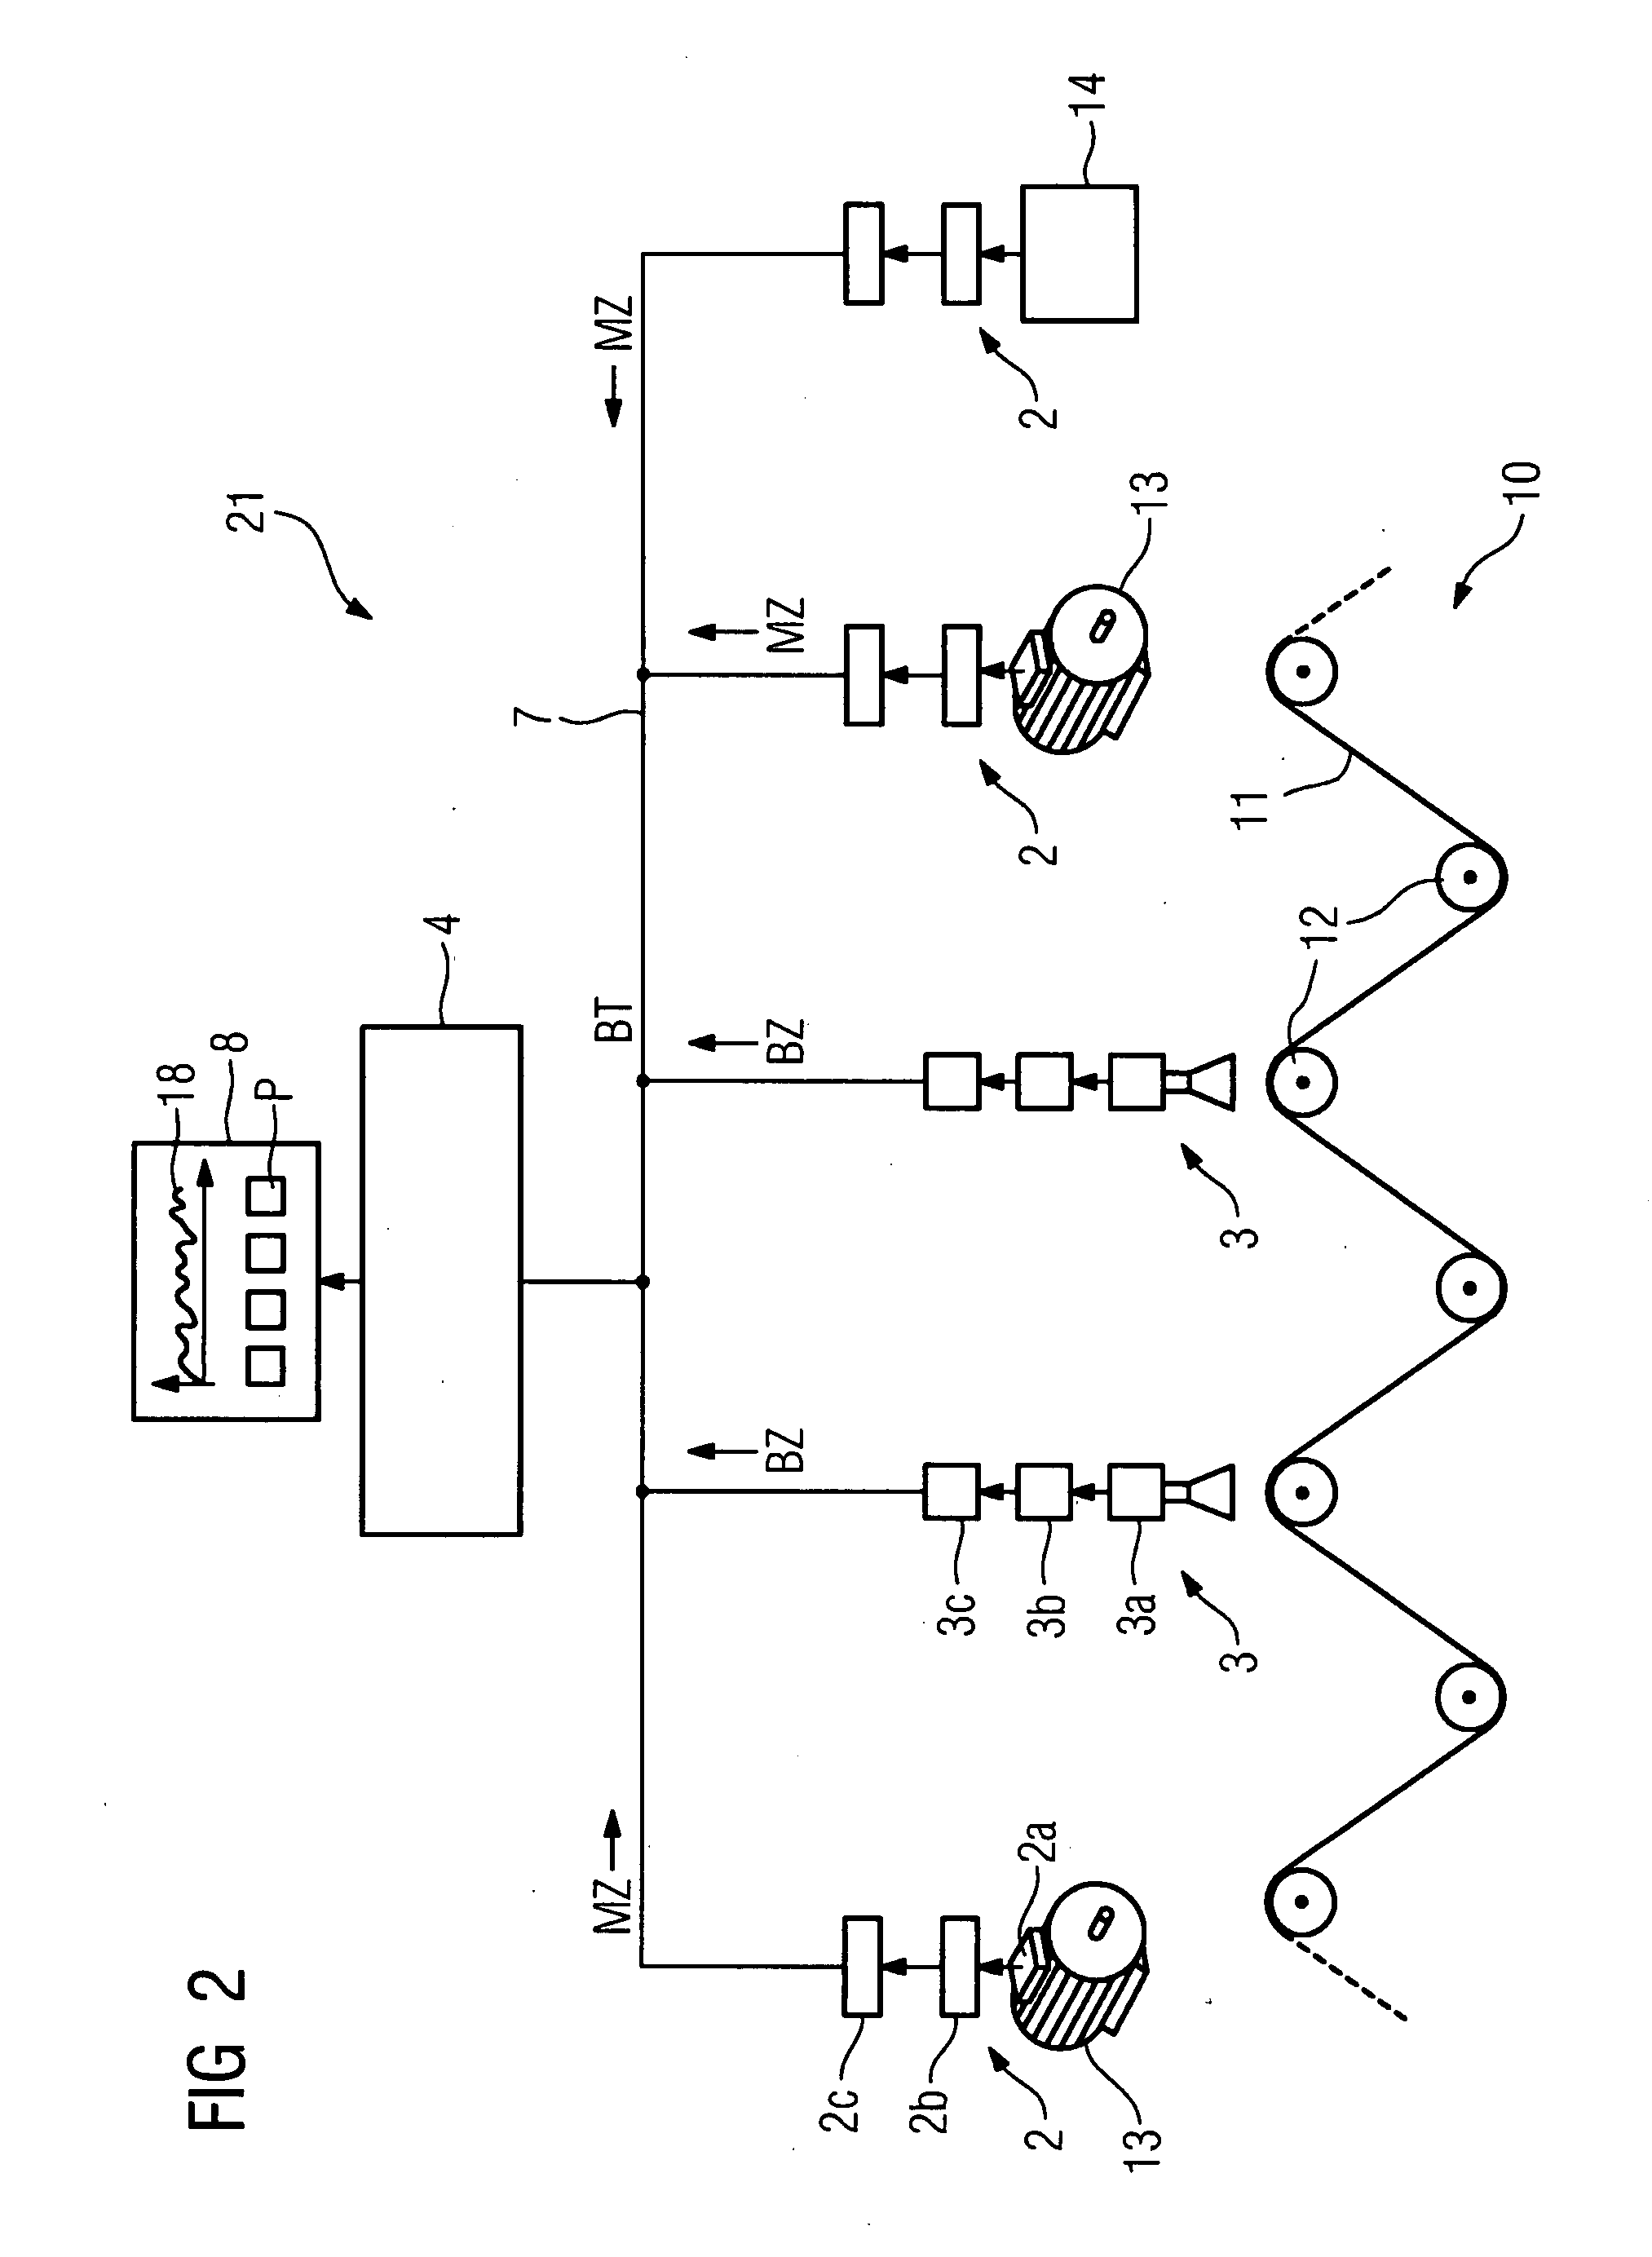 Method and Device For Analyzing a Technical Process